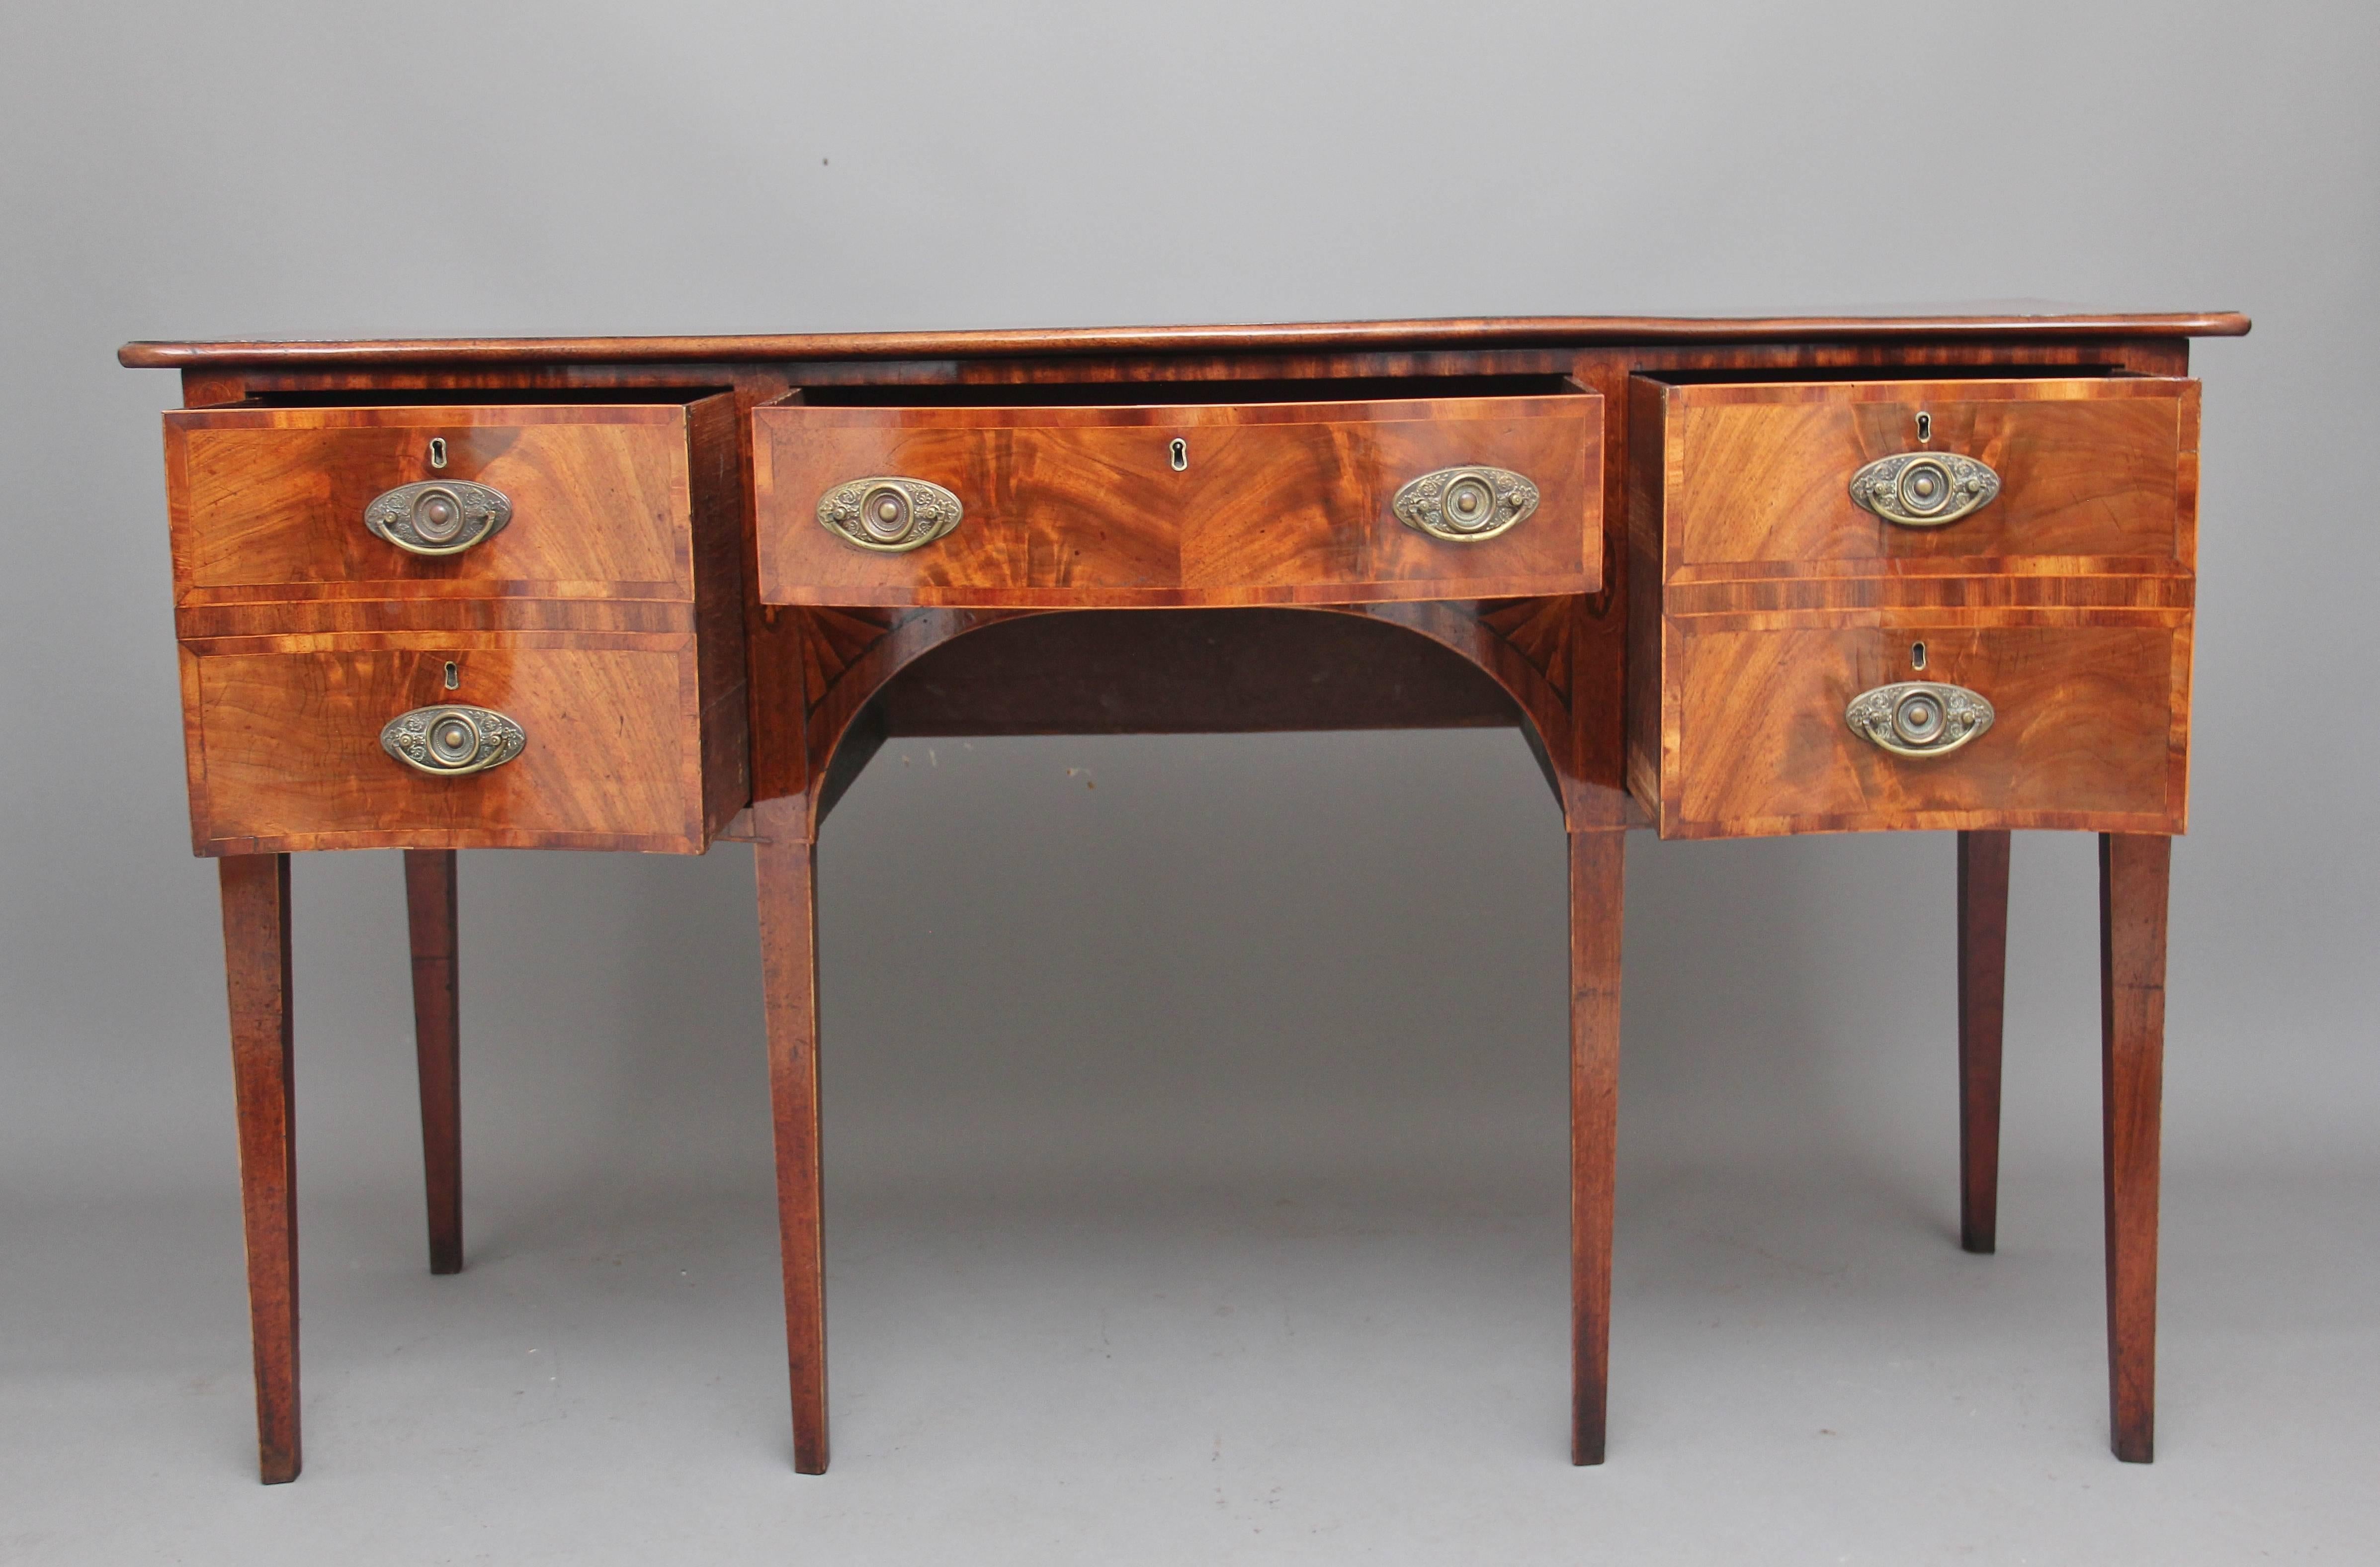 18th century mahogany inlaid serpentine sideboard, the shaped top crossbanded and having a moulded edge, with three oak lined drawers below with oval brass plate handles, the drawer fronts also crossbanded, the front of the sideboard having boxwood